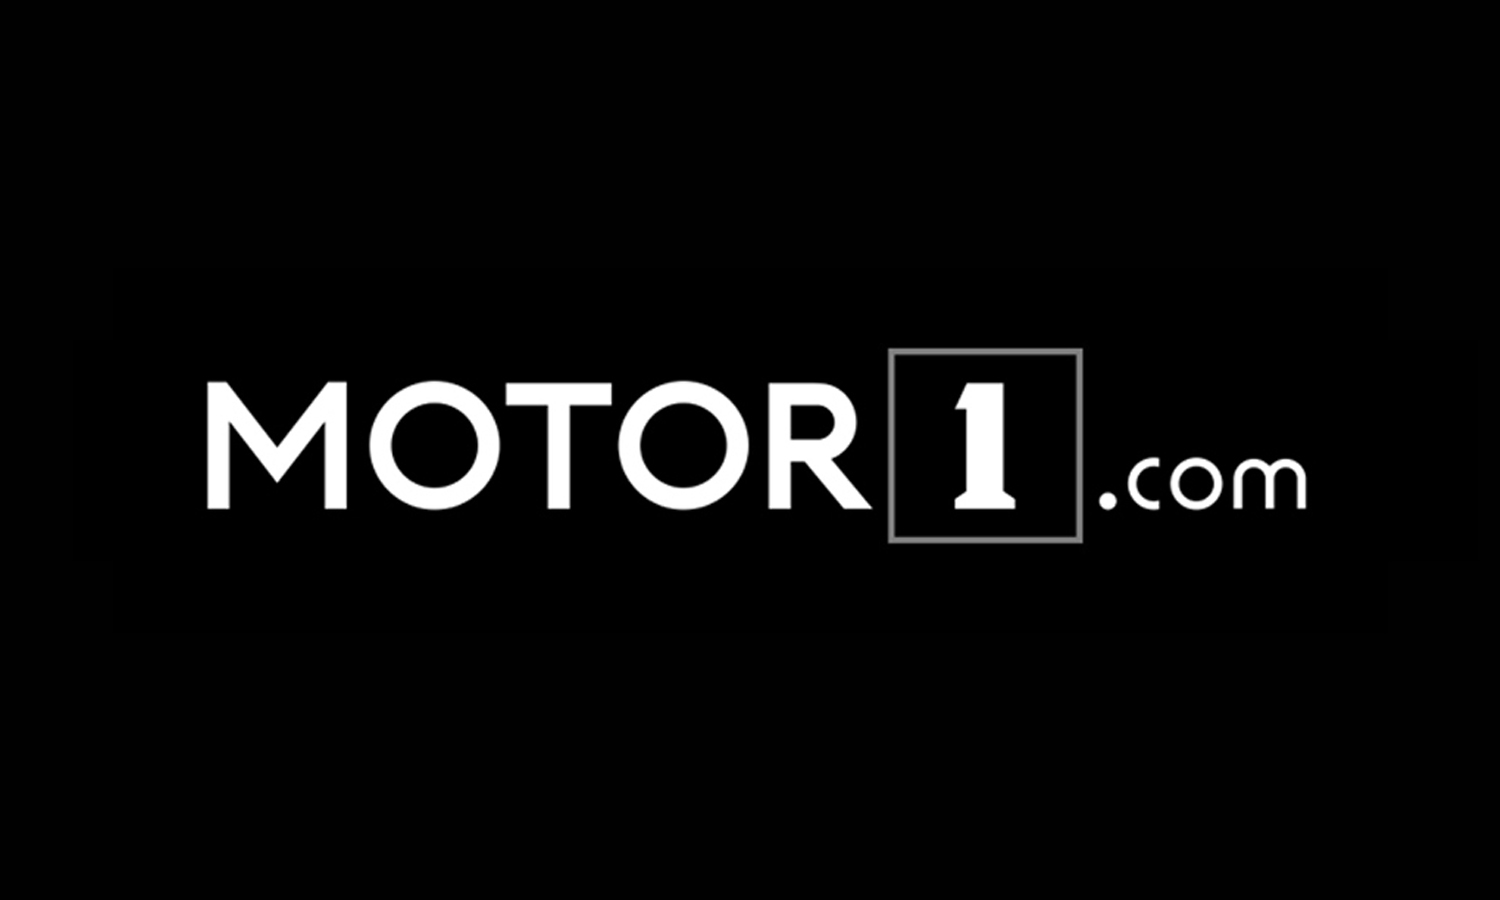 The motor1.com logo in black and white